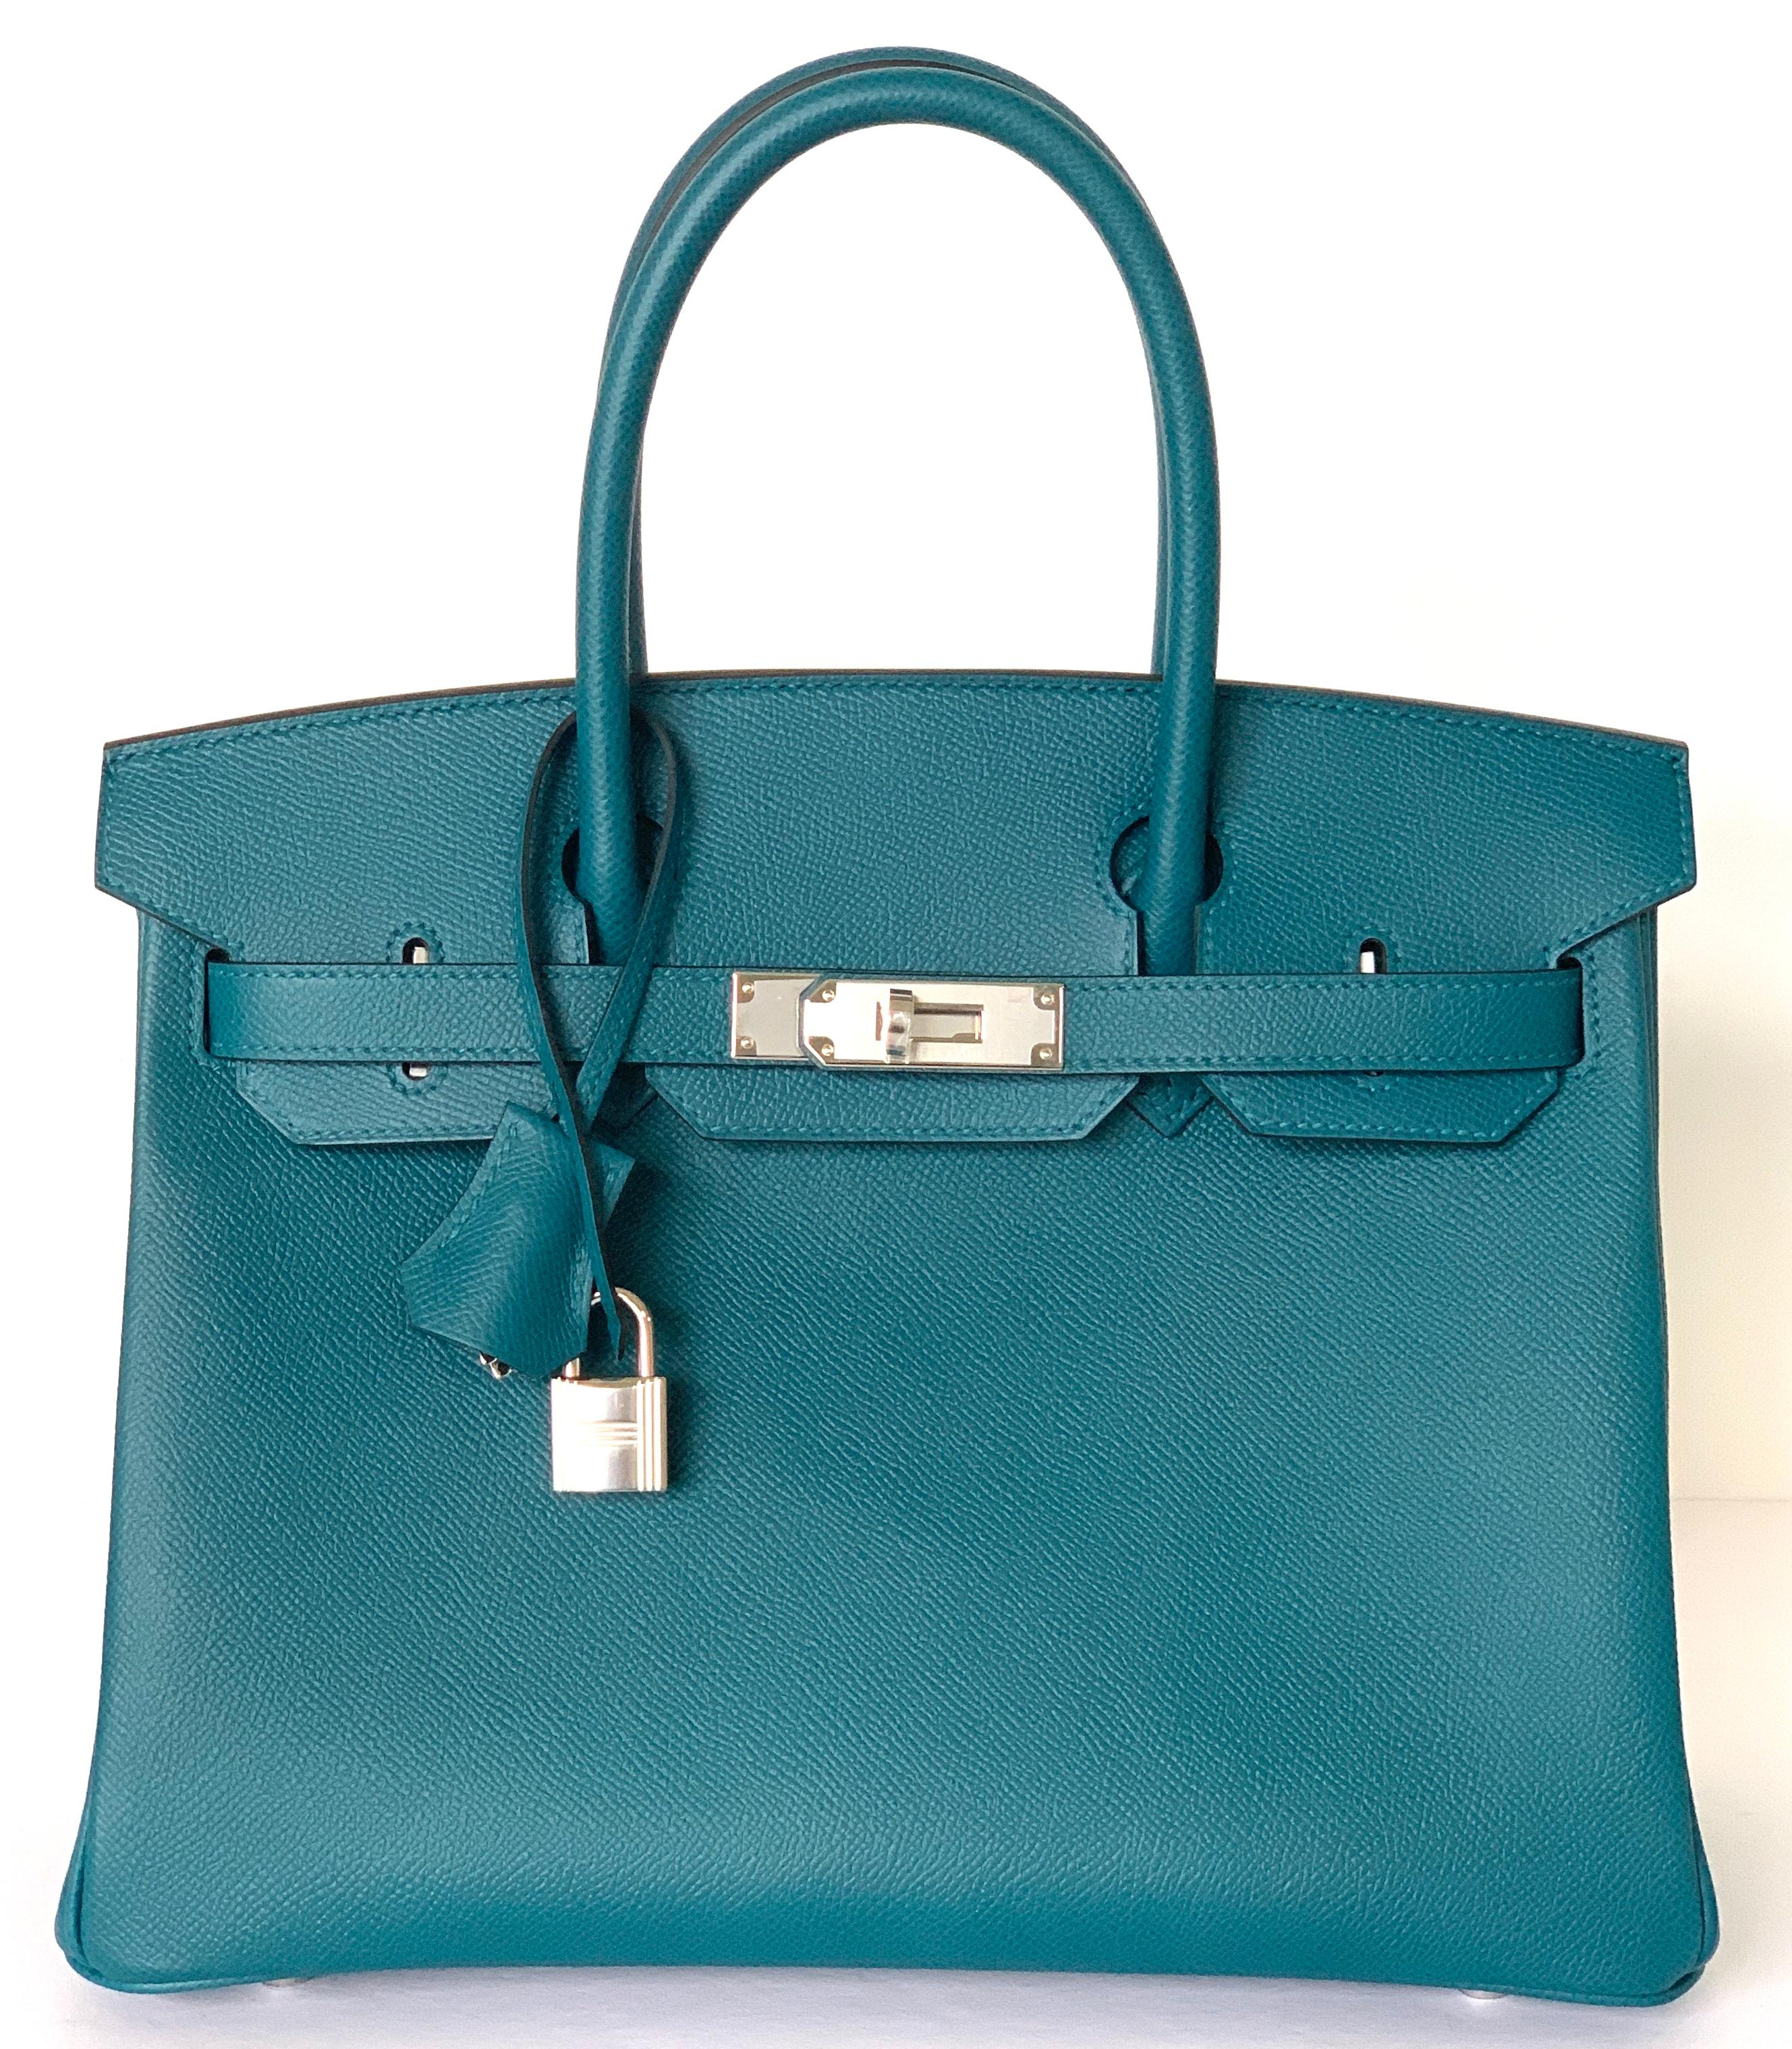 Hermes Vert Bosphore Birkin 30cm of epsom leather with palladium hardware.

This Birkin has tonal stitching, a front toggle closure, a clochette with lock and two keys, and double rolled handles.

The interior is lined with  chevre and has one zip